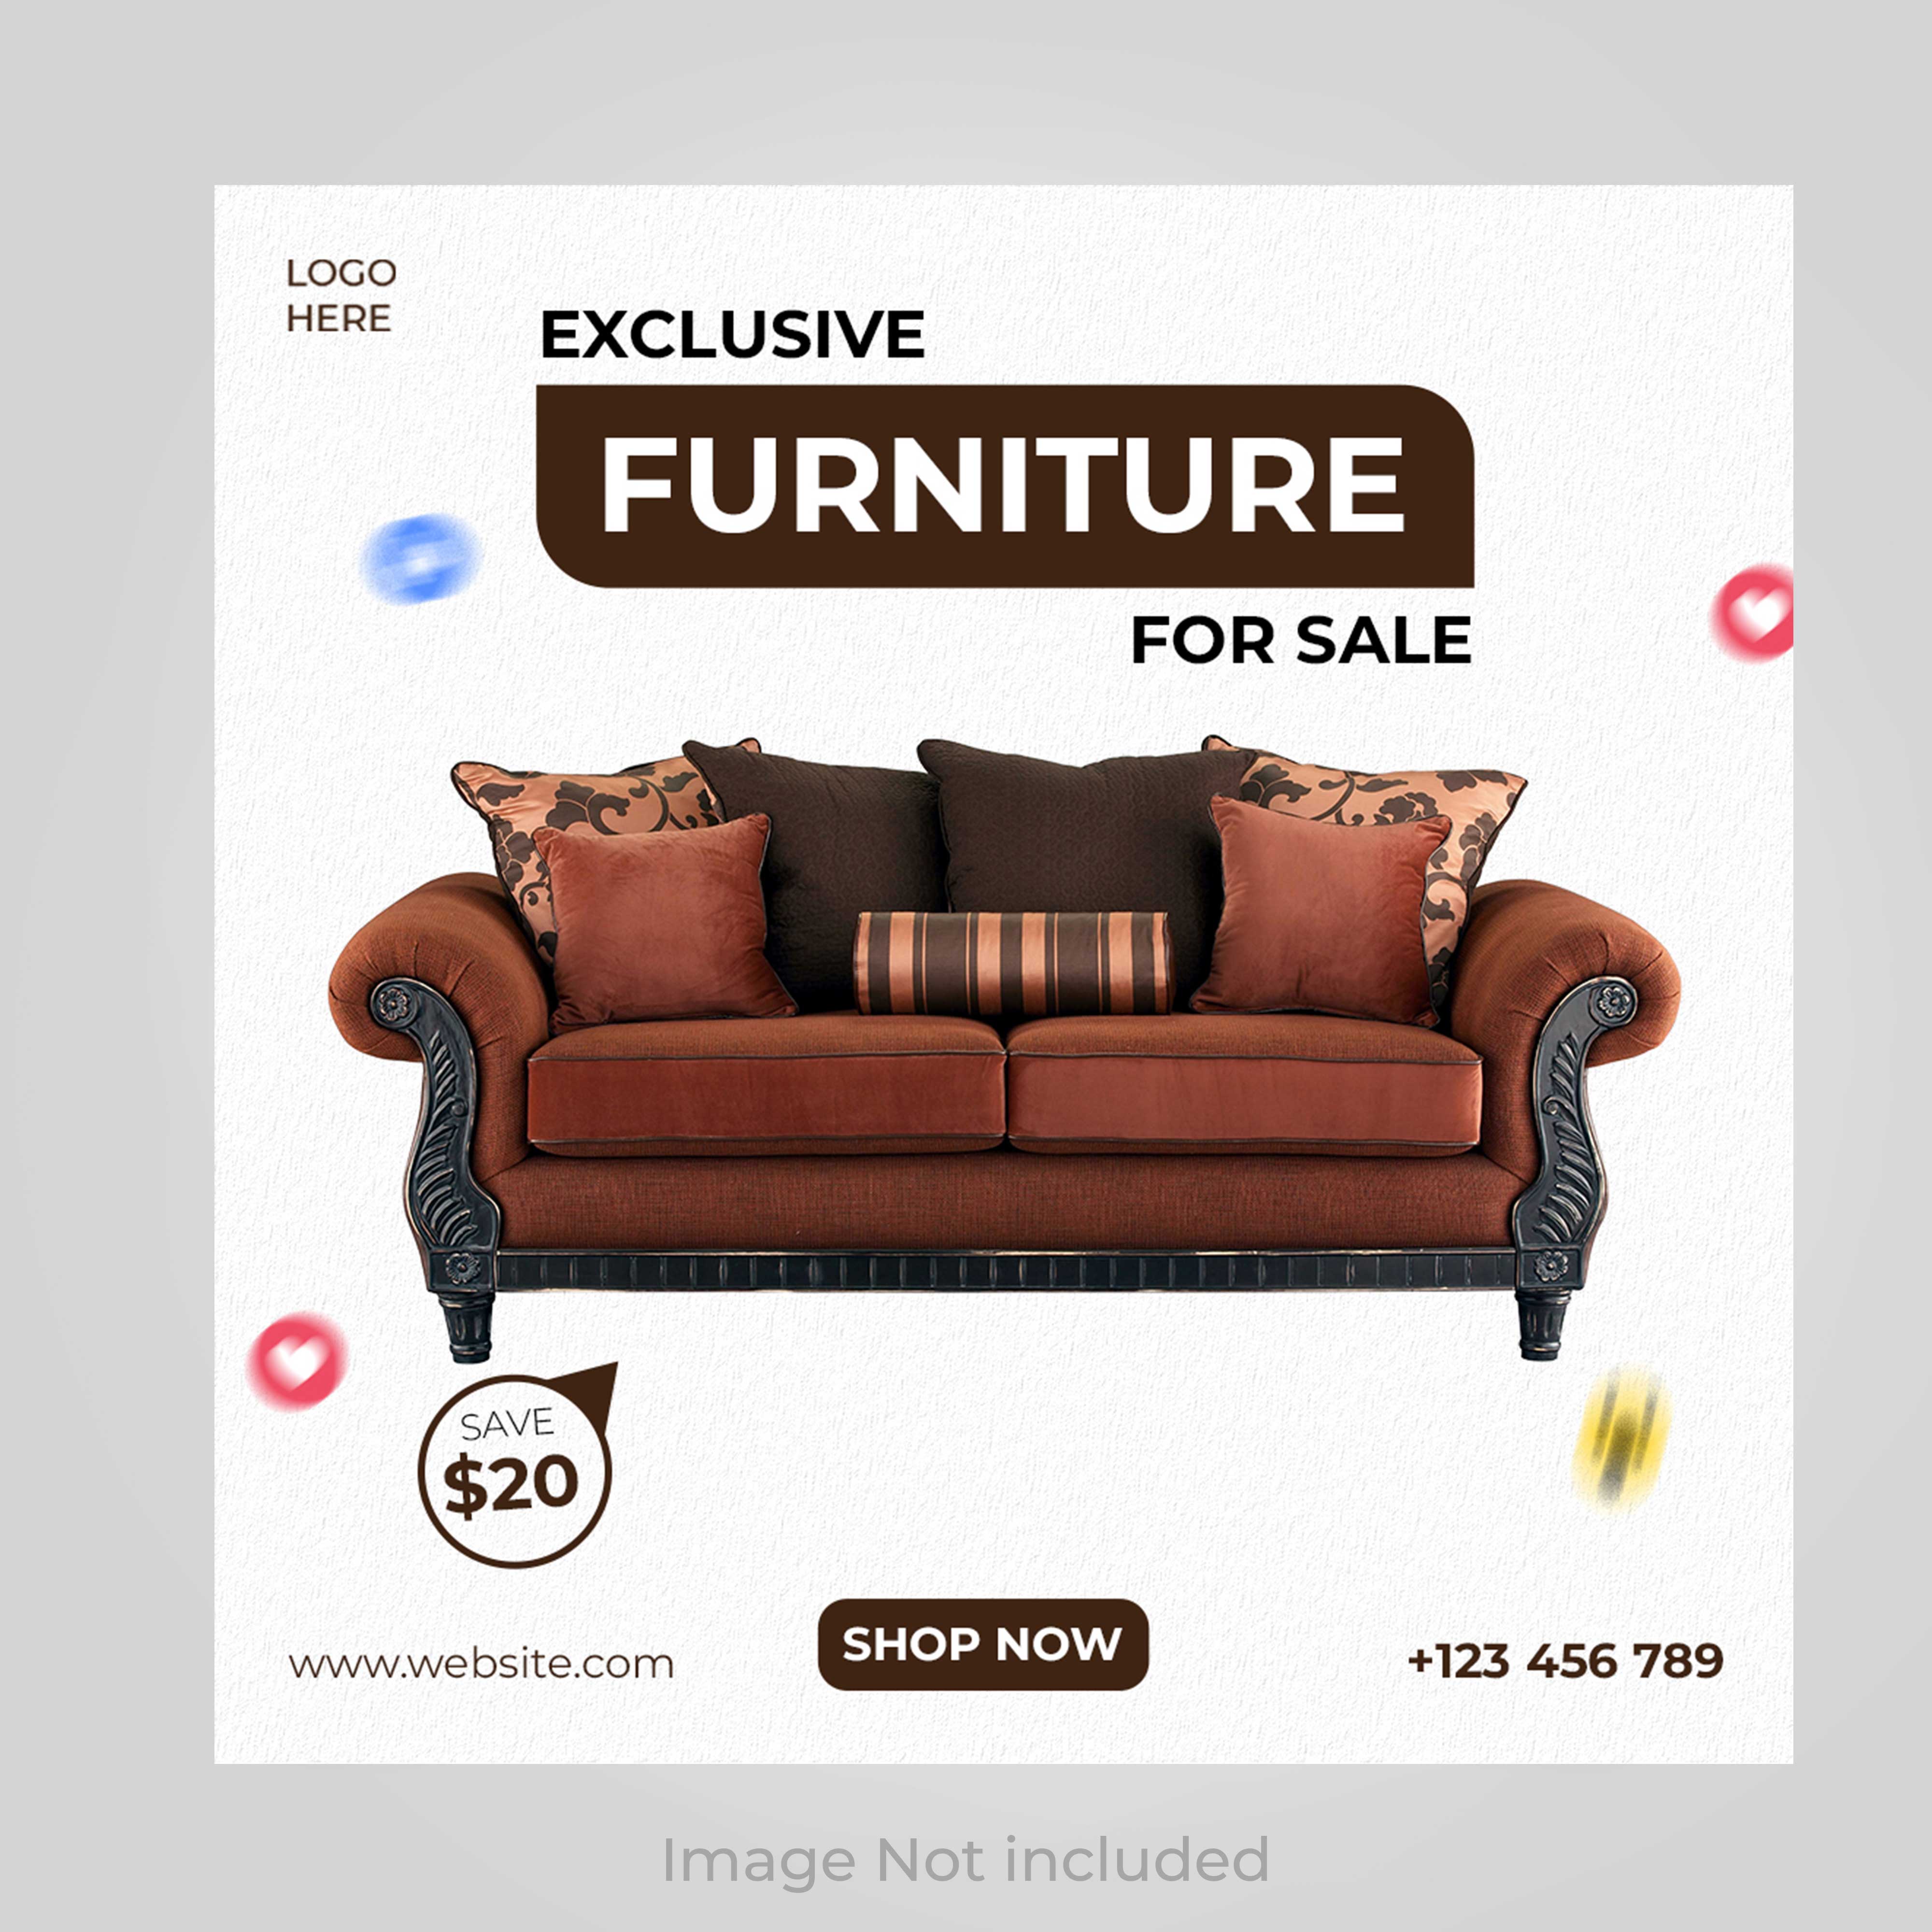 Couch with pillows and pillows on it for sale.